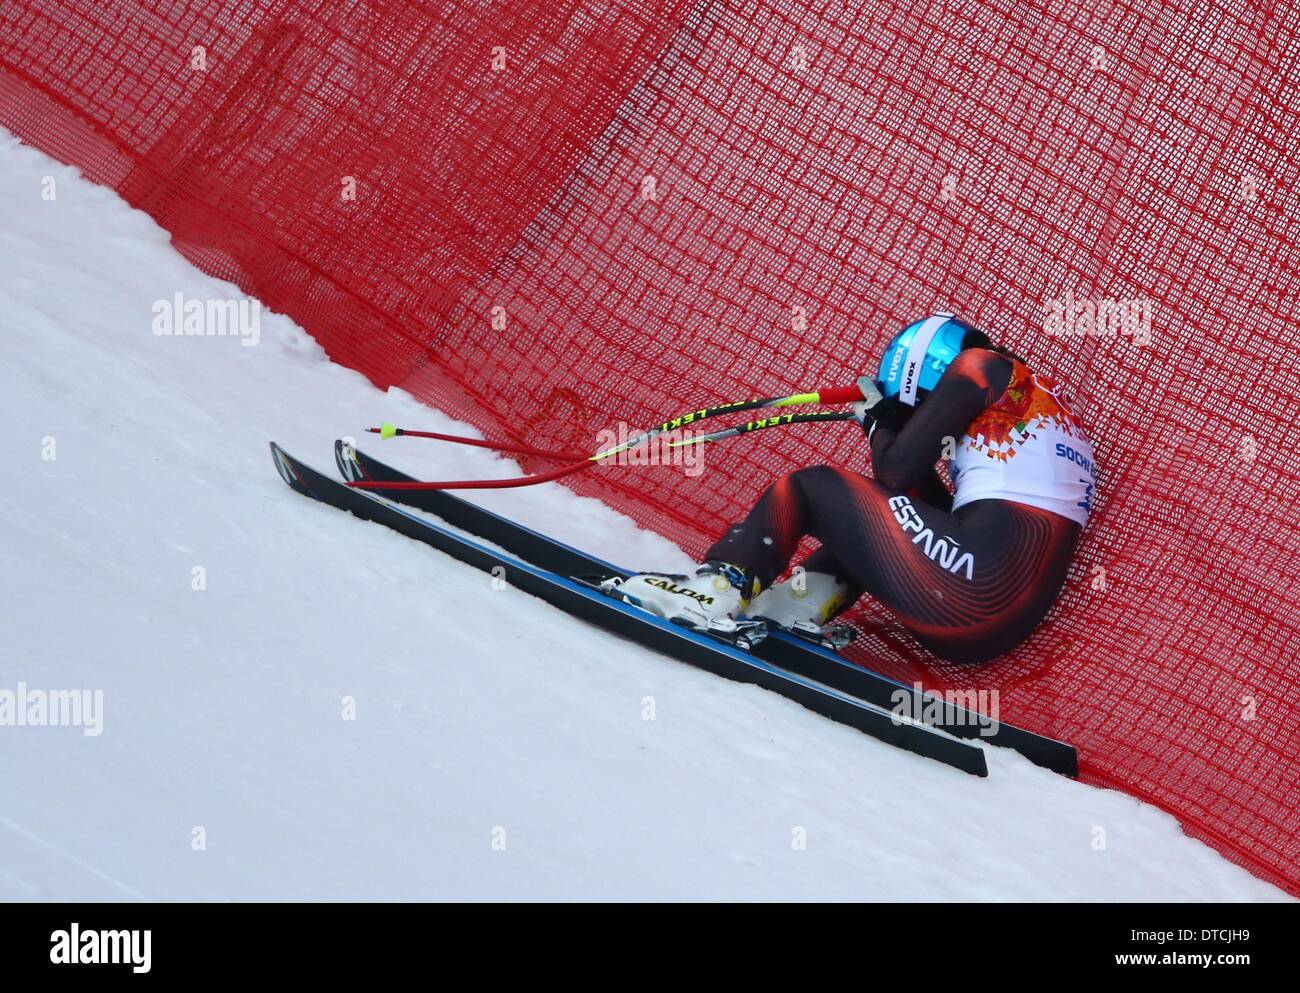 Carolina Ruiz Castillo of Spain lies in the net after falling during the Women's Super G Alpine Skiing event in Rosa Khutor Alpine Center at the Sochi 2014 Olympic Games, Krasnaya Polyana, Russia, 15 February 2014. Photo: Michael Kappeler/dpa Stock Photo